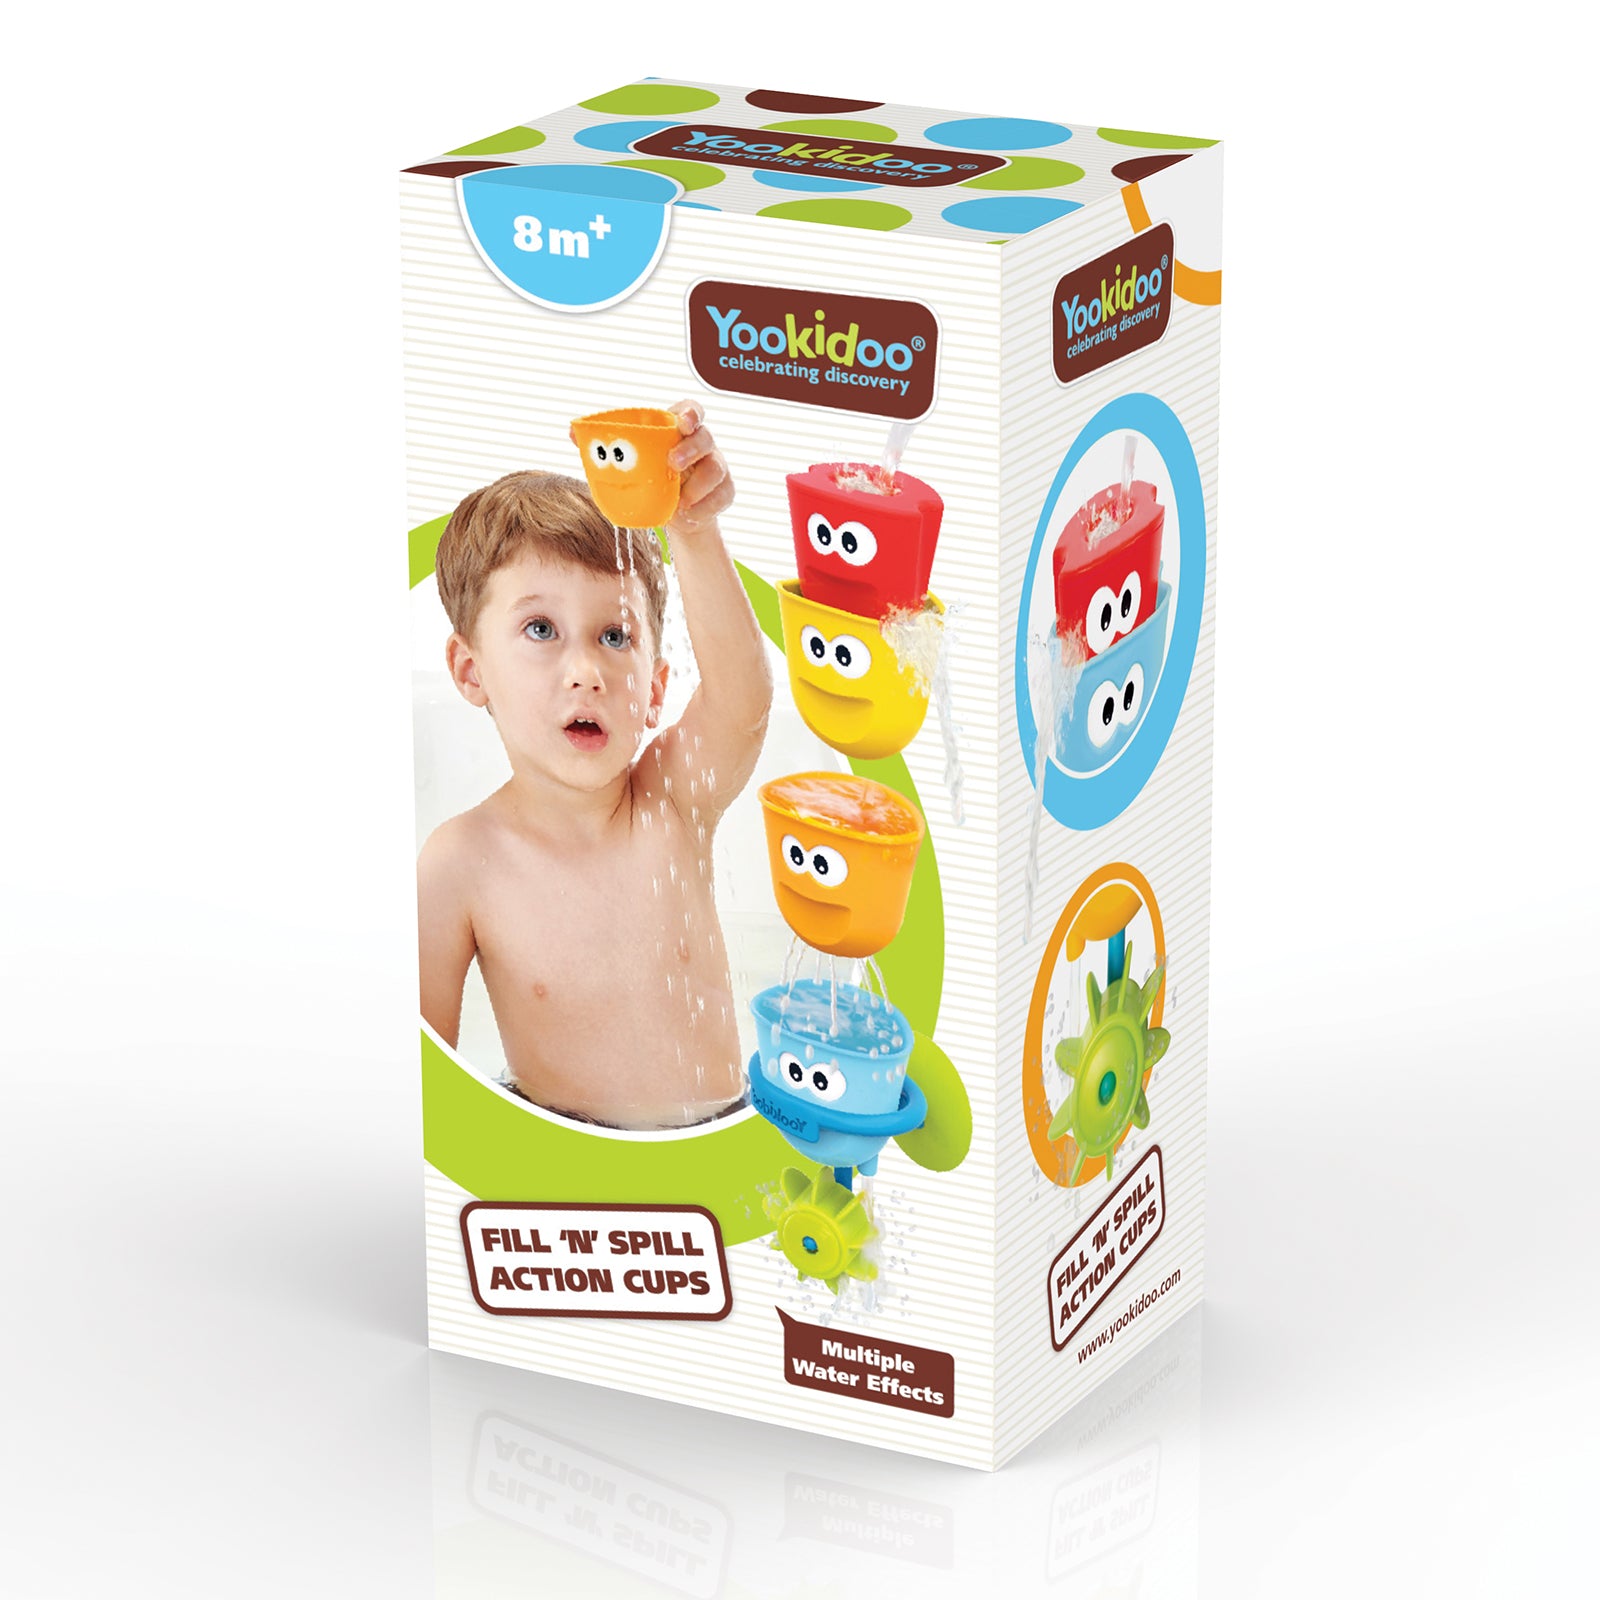 Yookidoo Fill 'N' Spill Action Cups Blister Bath Toy